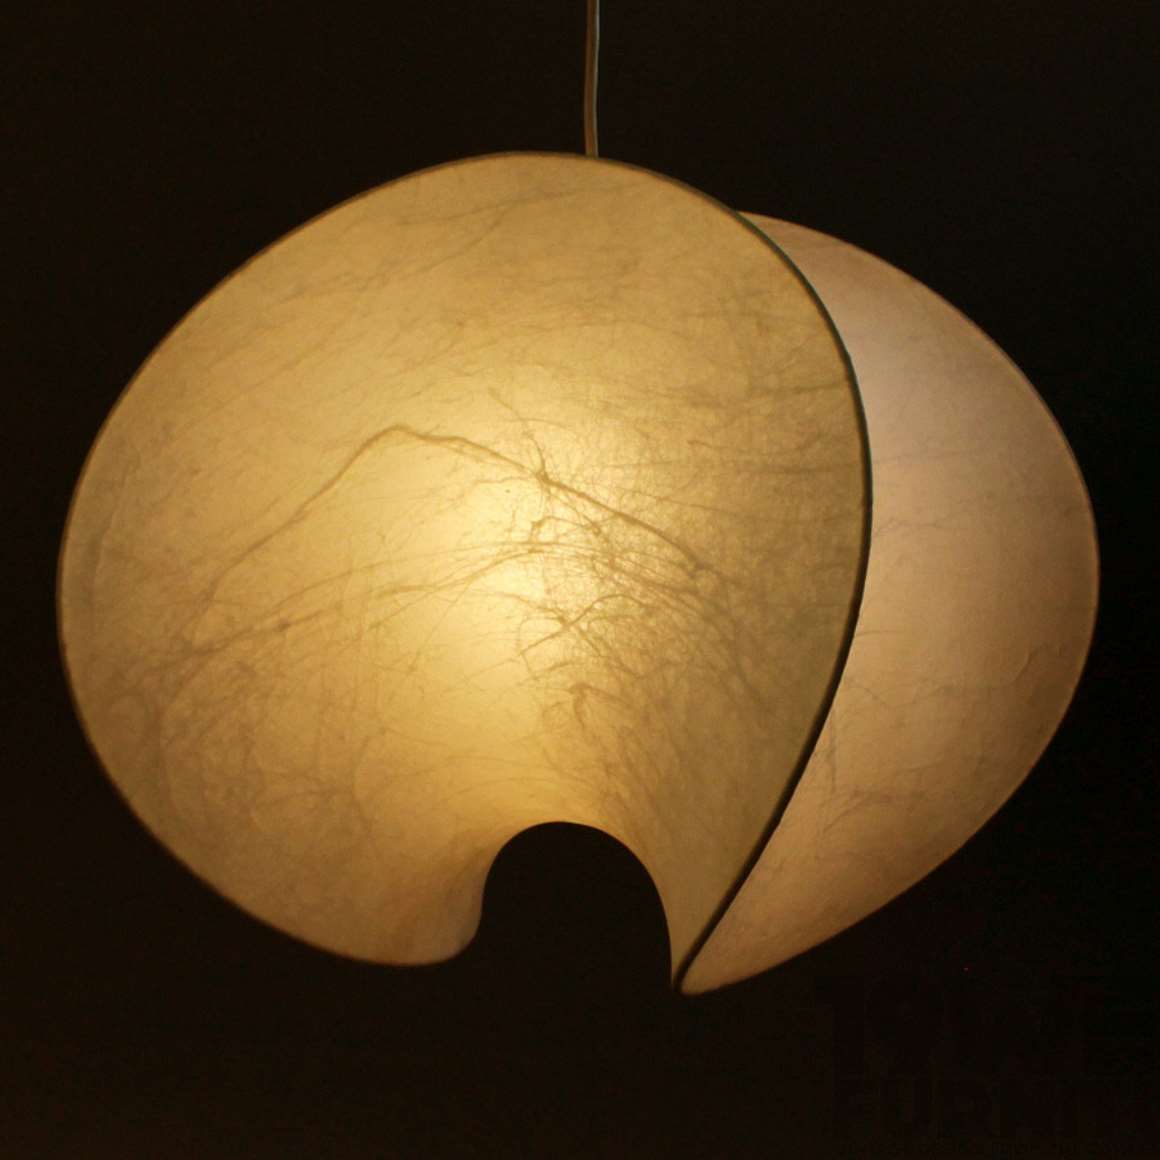 Goldkant Leuchten Cocoon Orsa pendant lamp sprayed plastic wire frame 1960s 1970s Germany